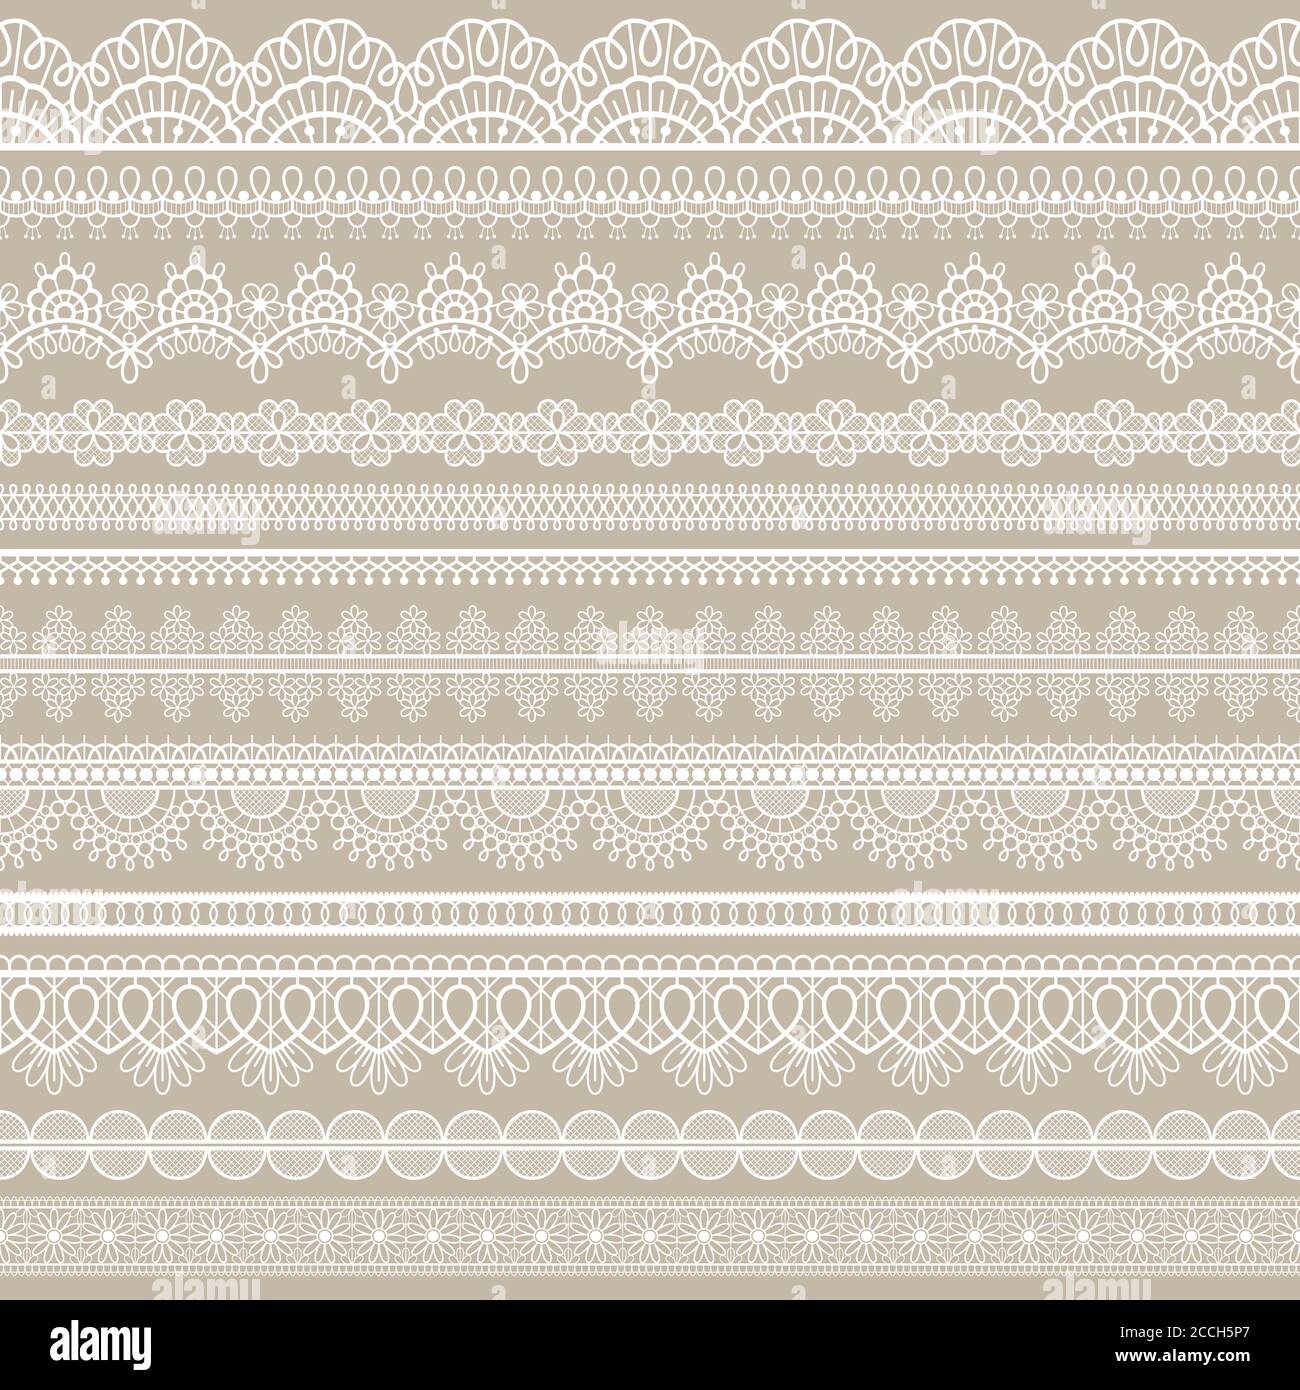 Lace seamless border. White cotton lace strips, embroidered decorative ornate eyelets pattern, horizontal textile stripe handmade vector set Stock Vector